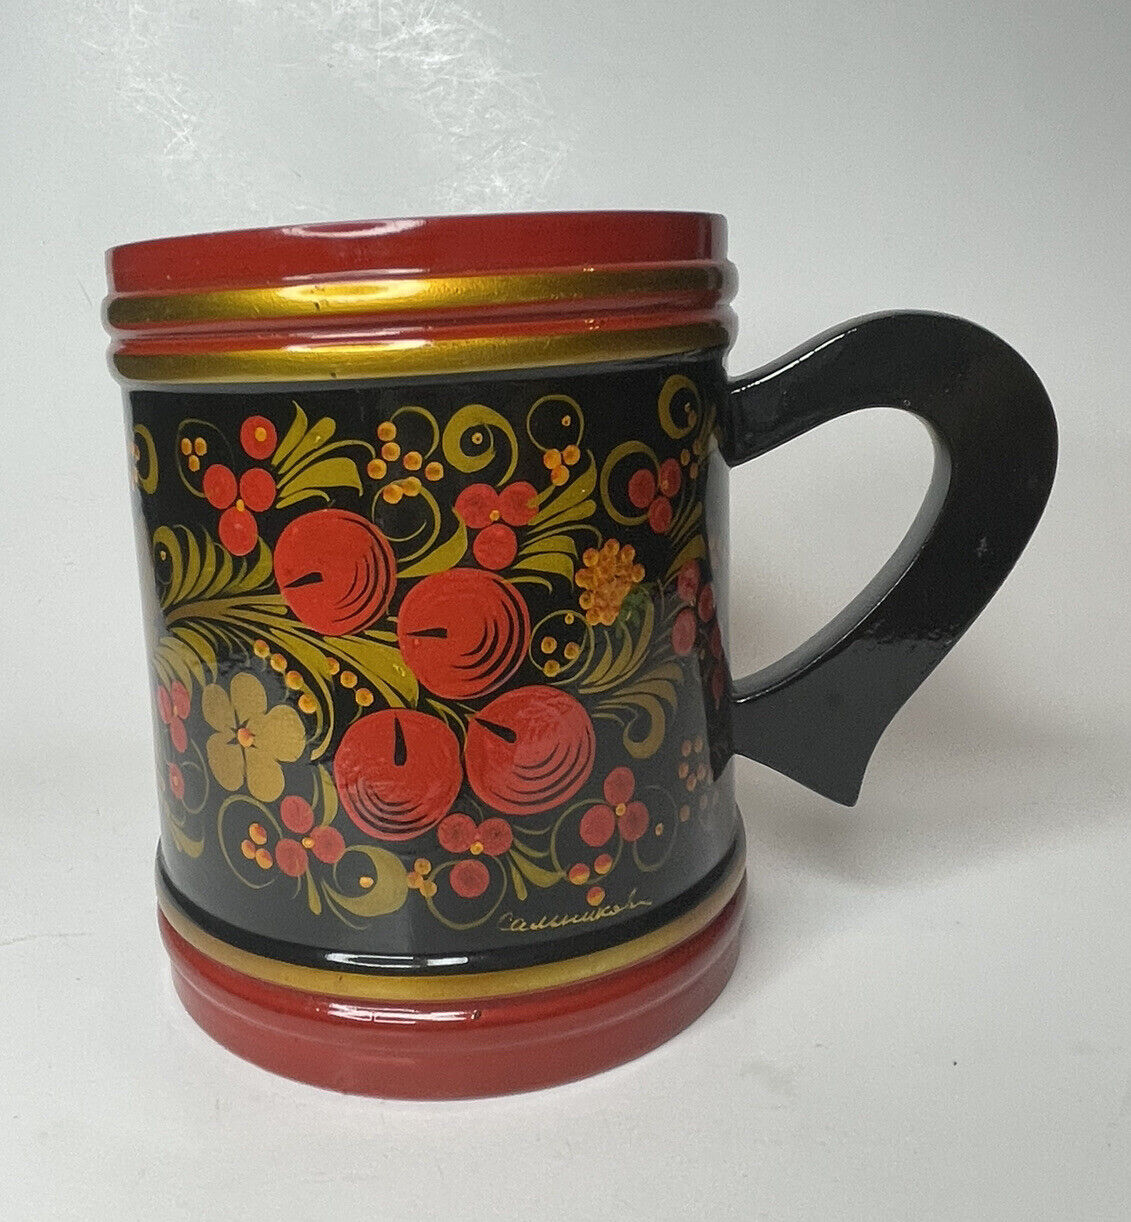 Vintage Khokhloma Signed Mug Hand Painted Russian Lacquer ware Large Flower Ins